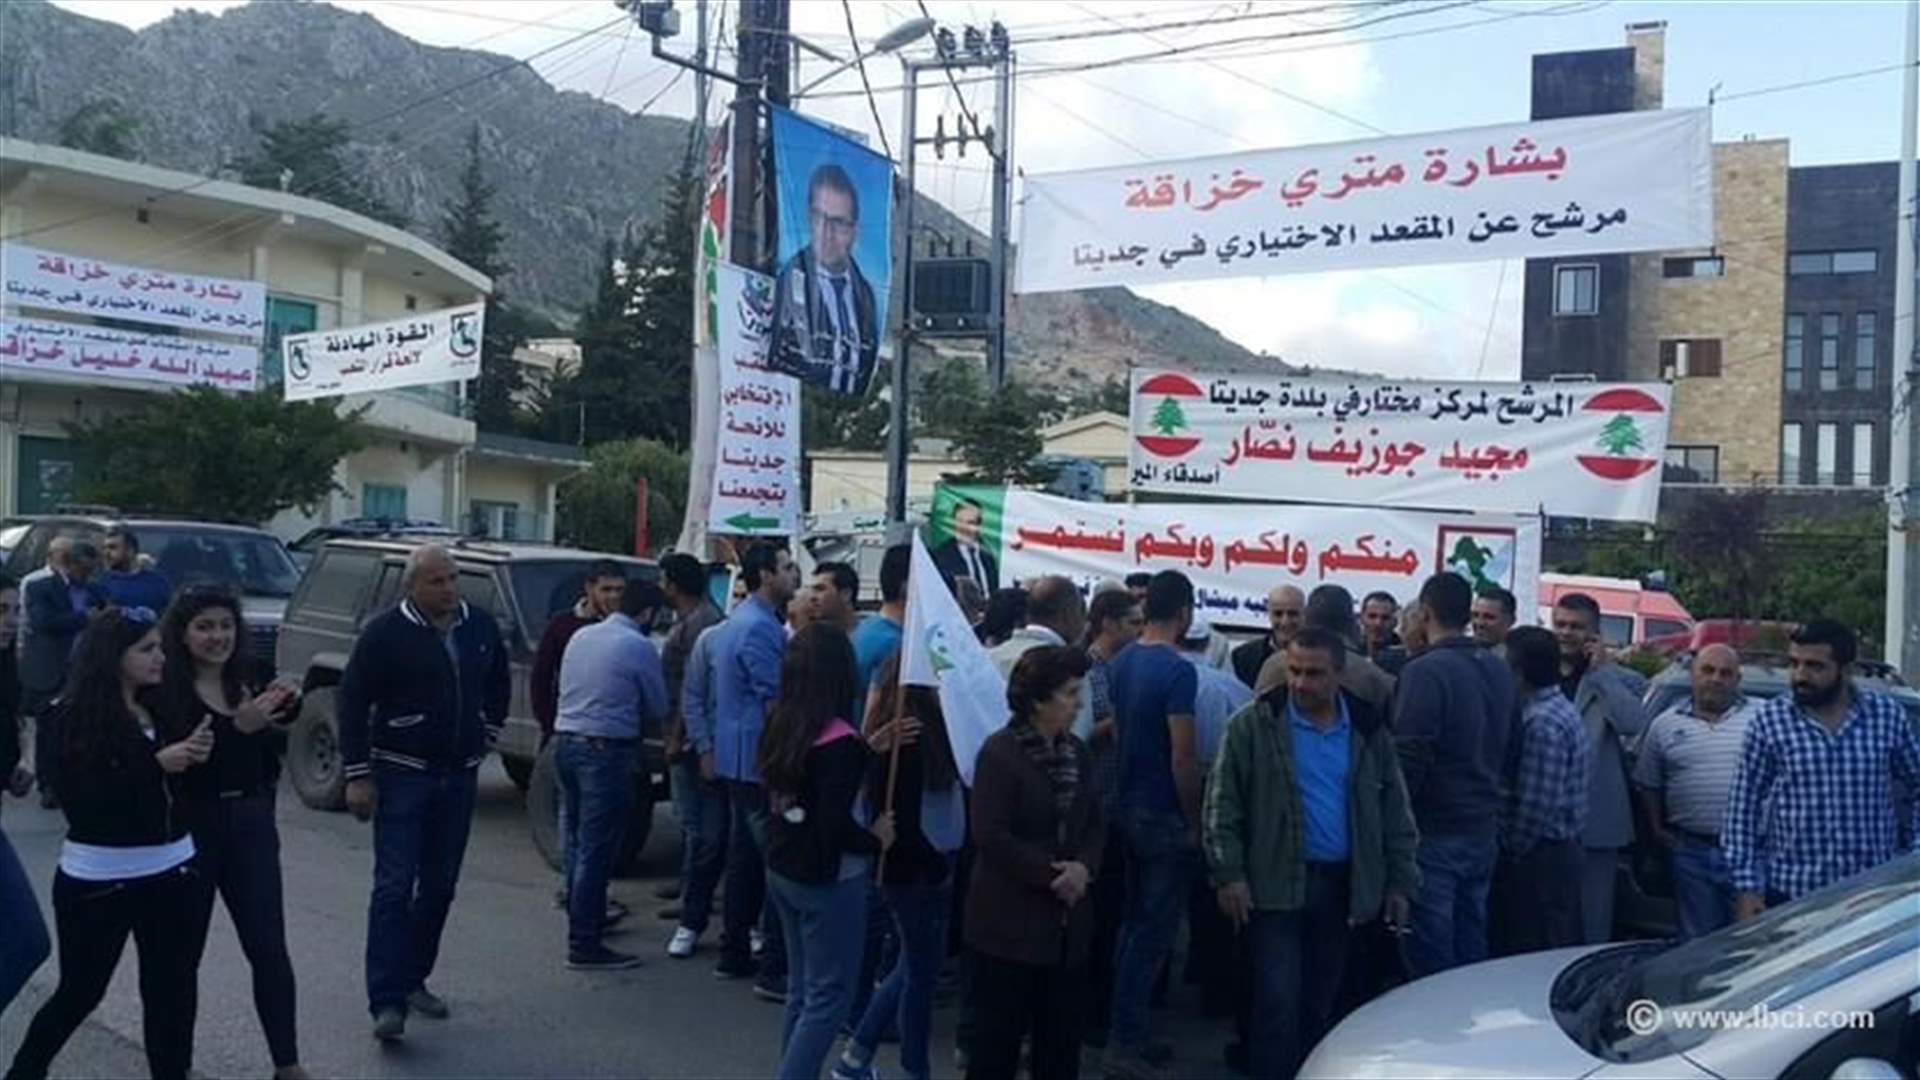 Jdita residents protest against postponement of municipal elections in their town